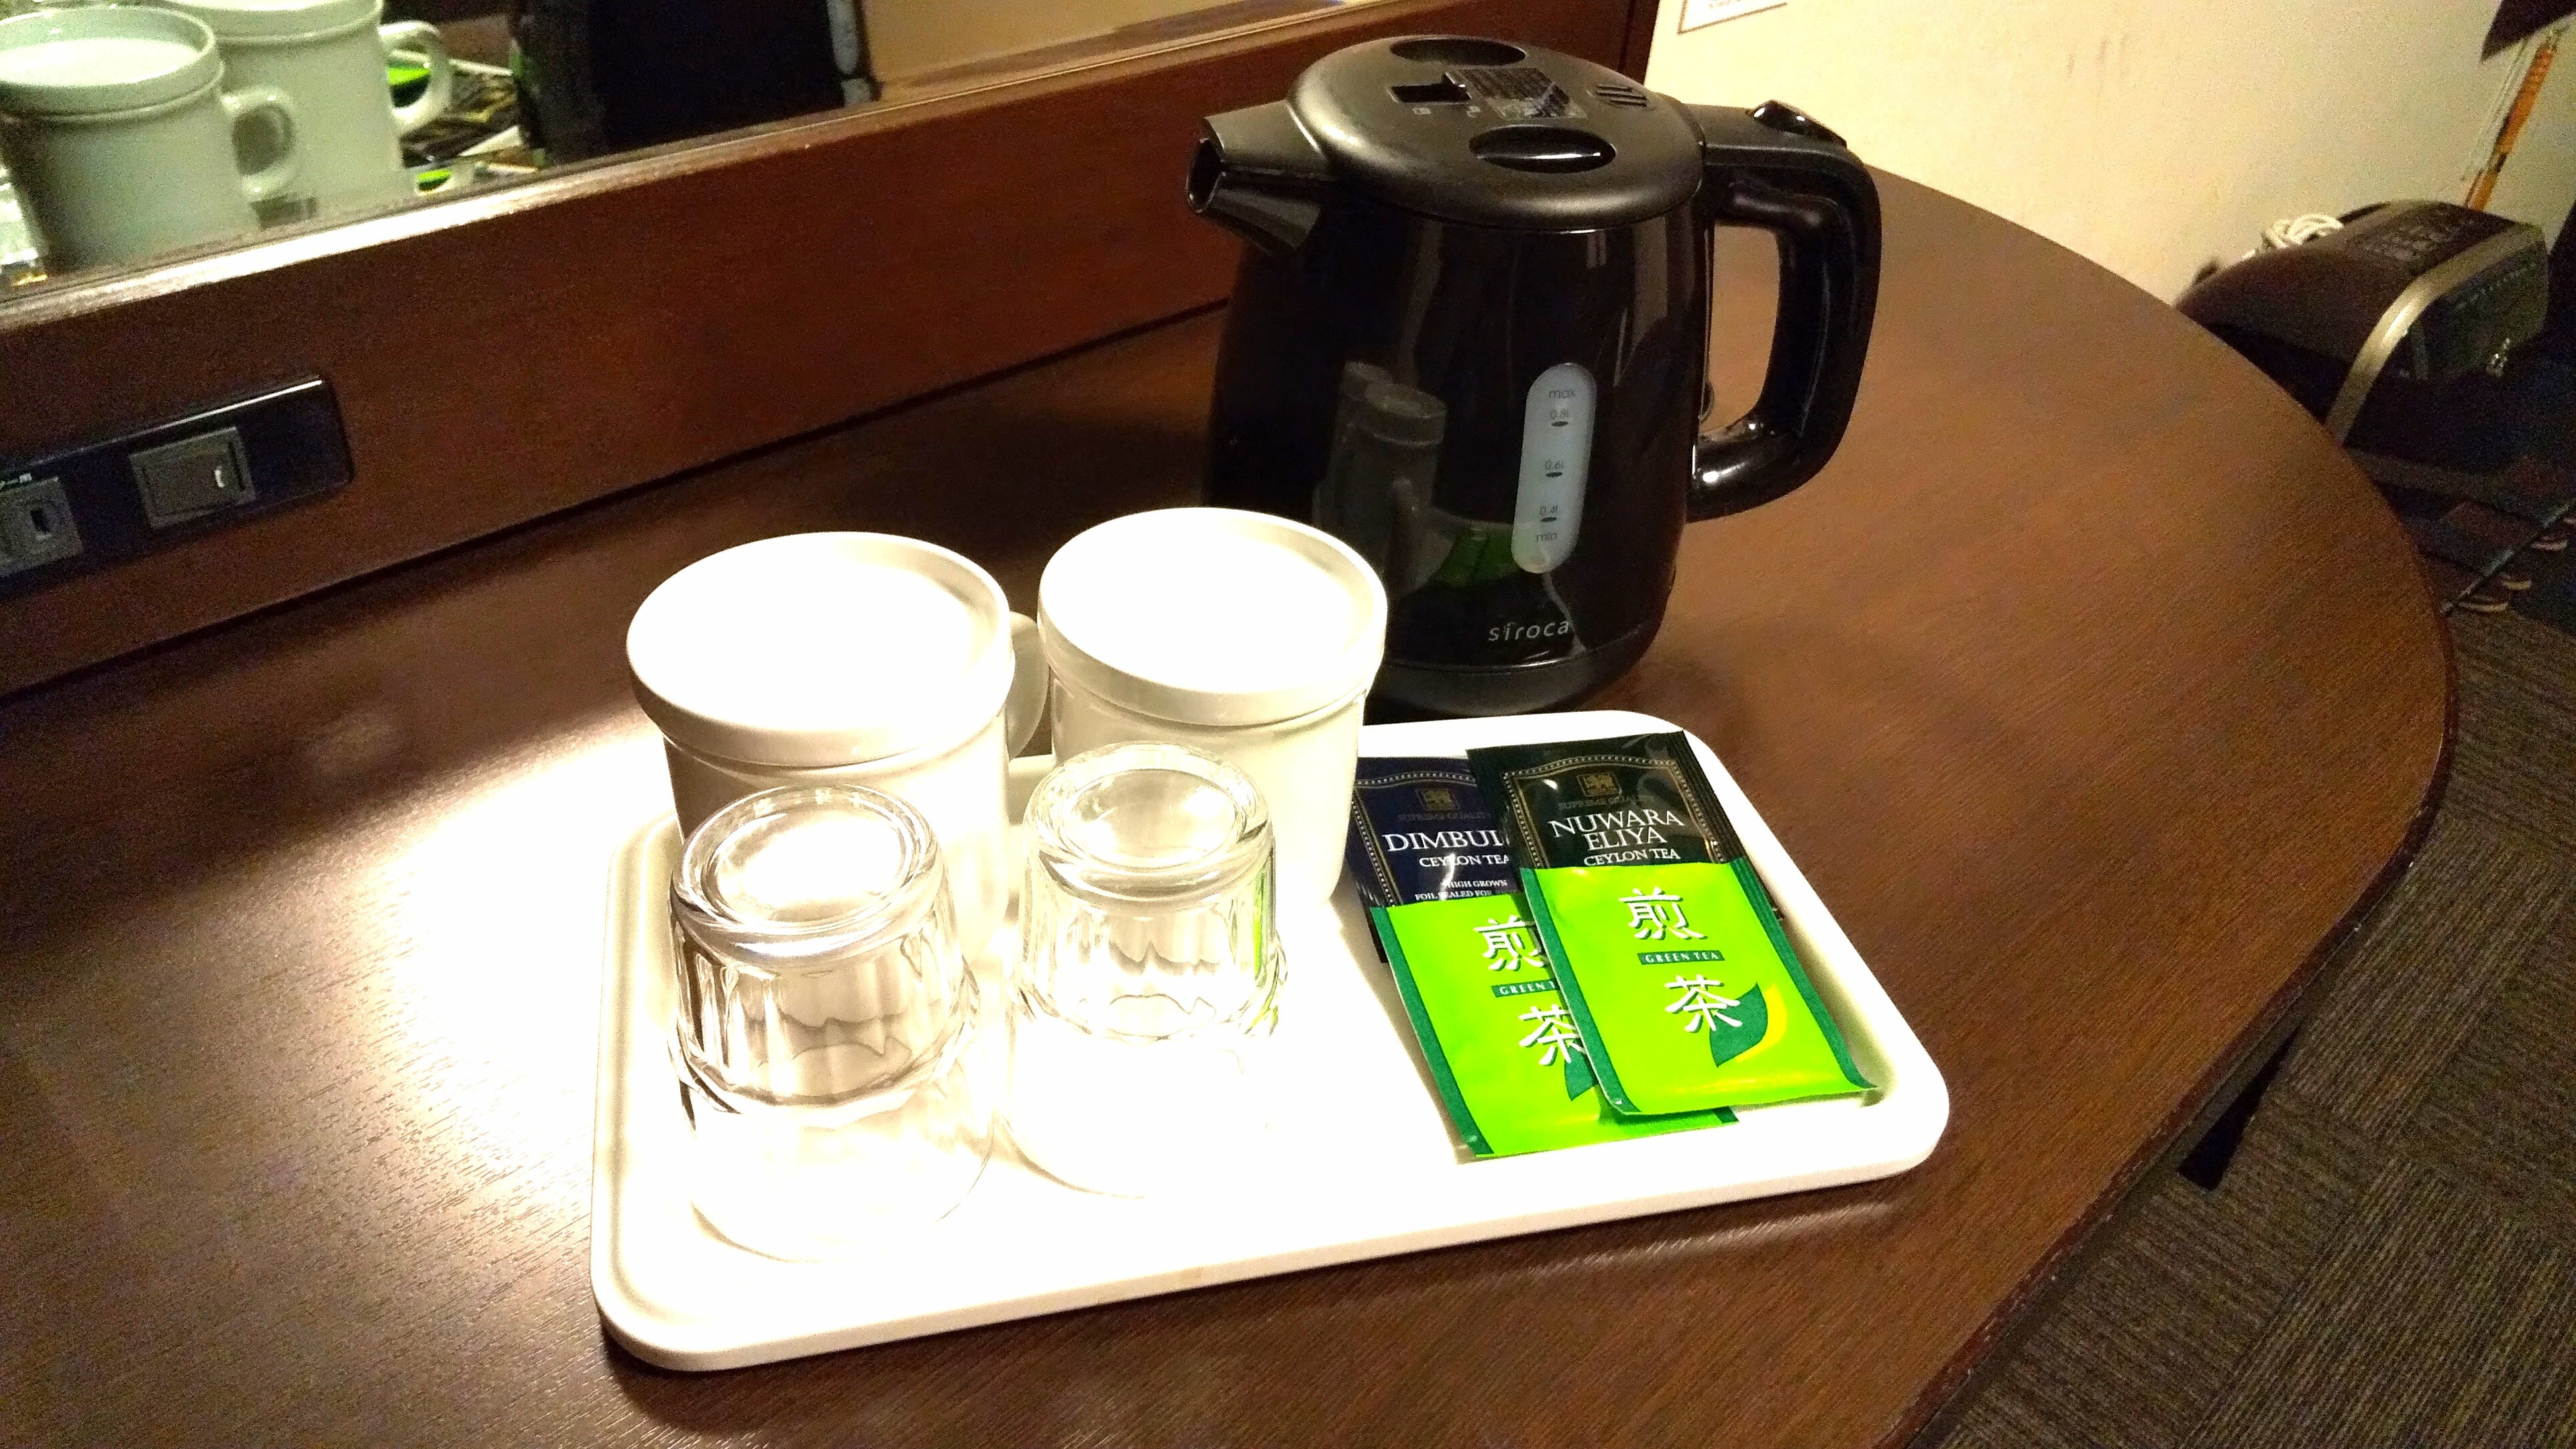 [Electric kettle, black tea, green tea] You can enjoy tea time in your room.